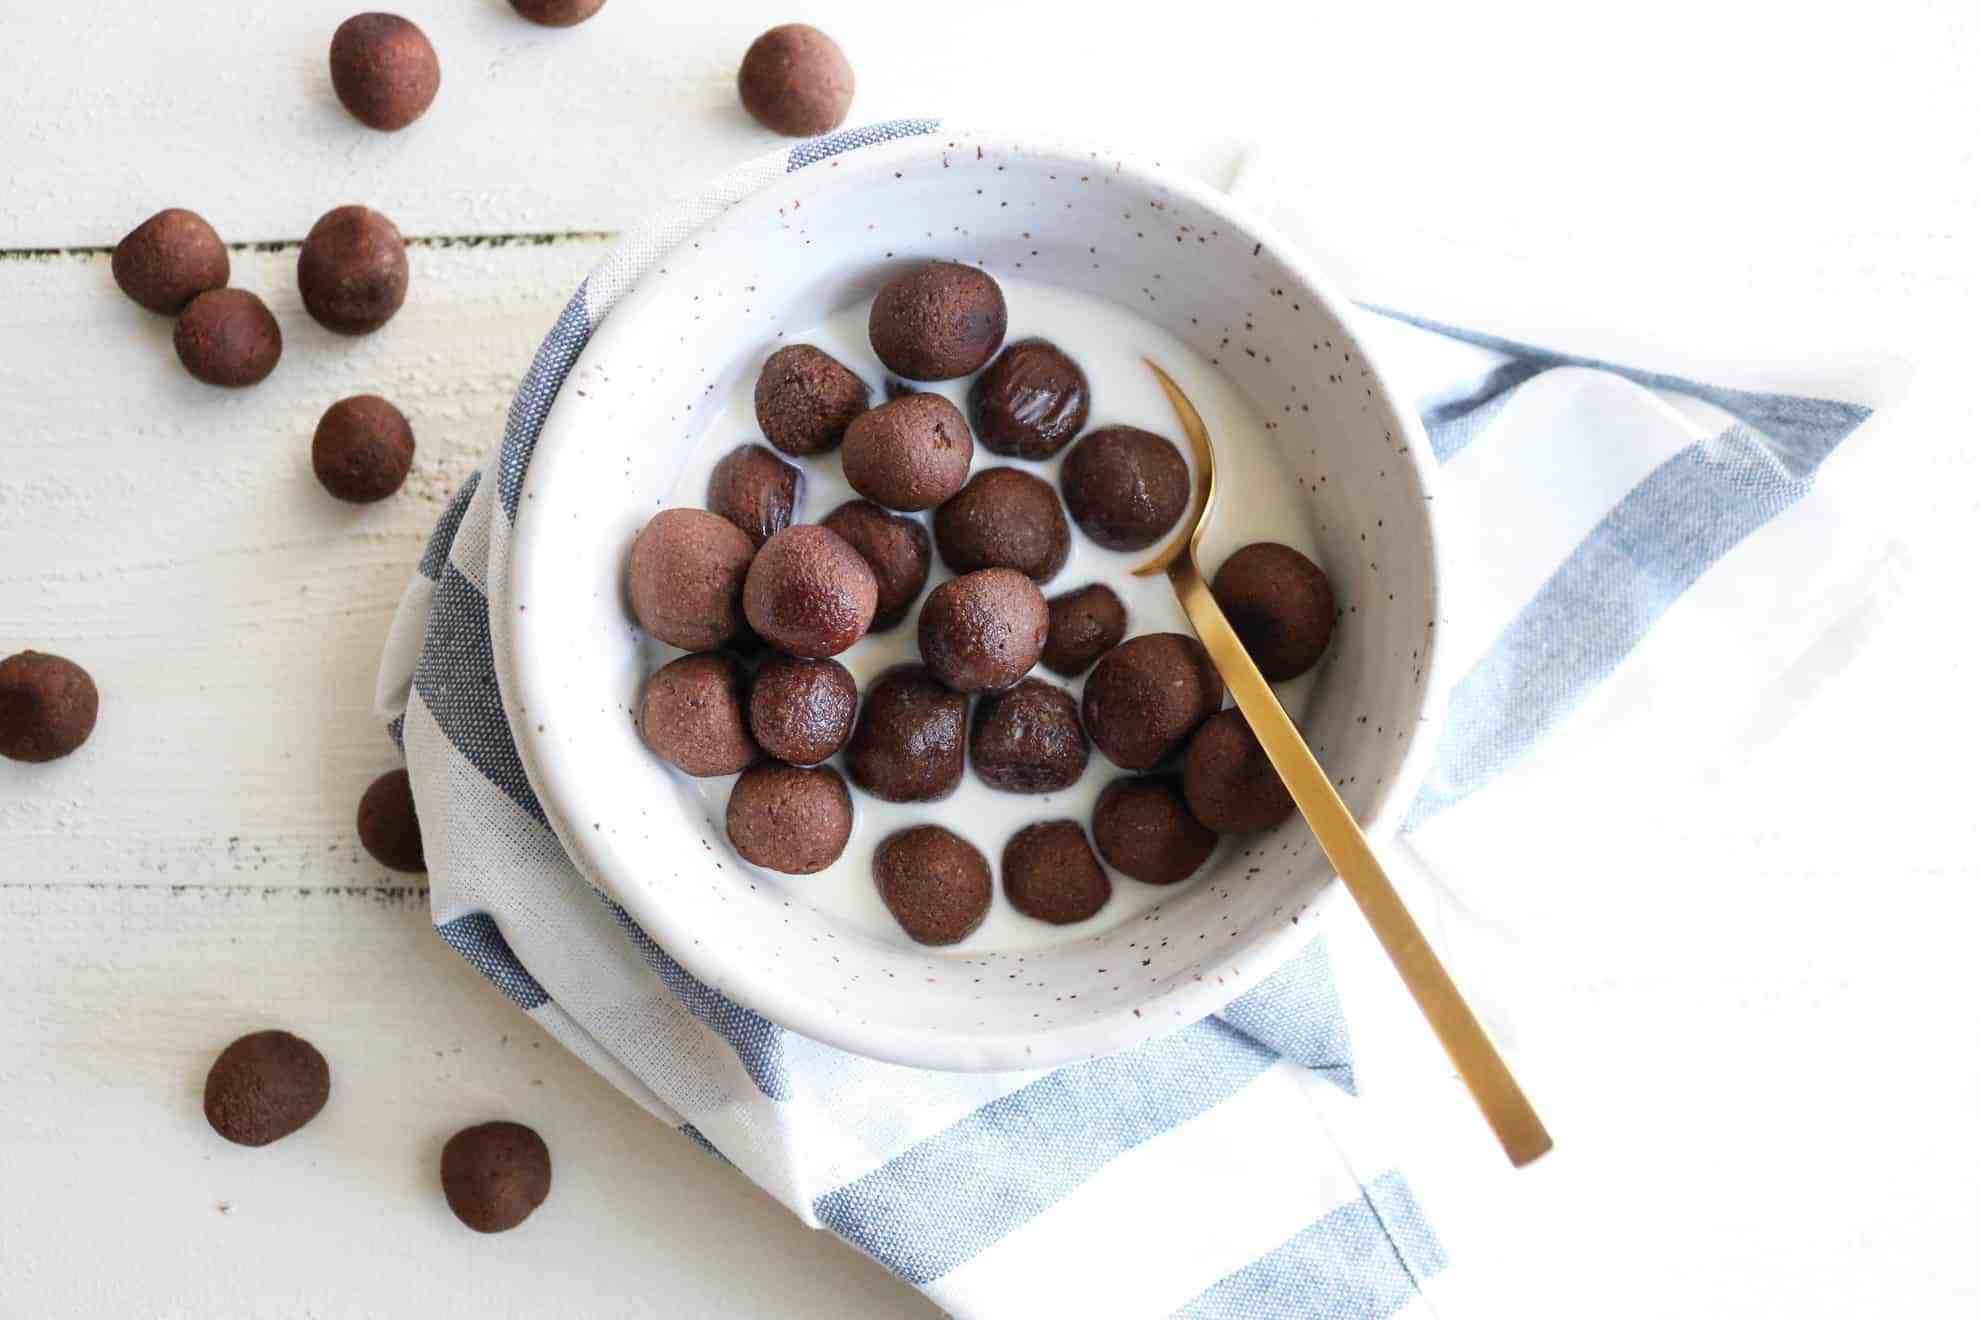 Healthy Cocoa Puffs Cereal